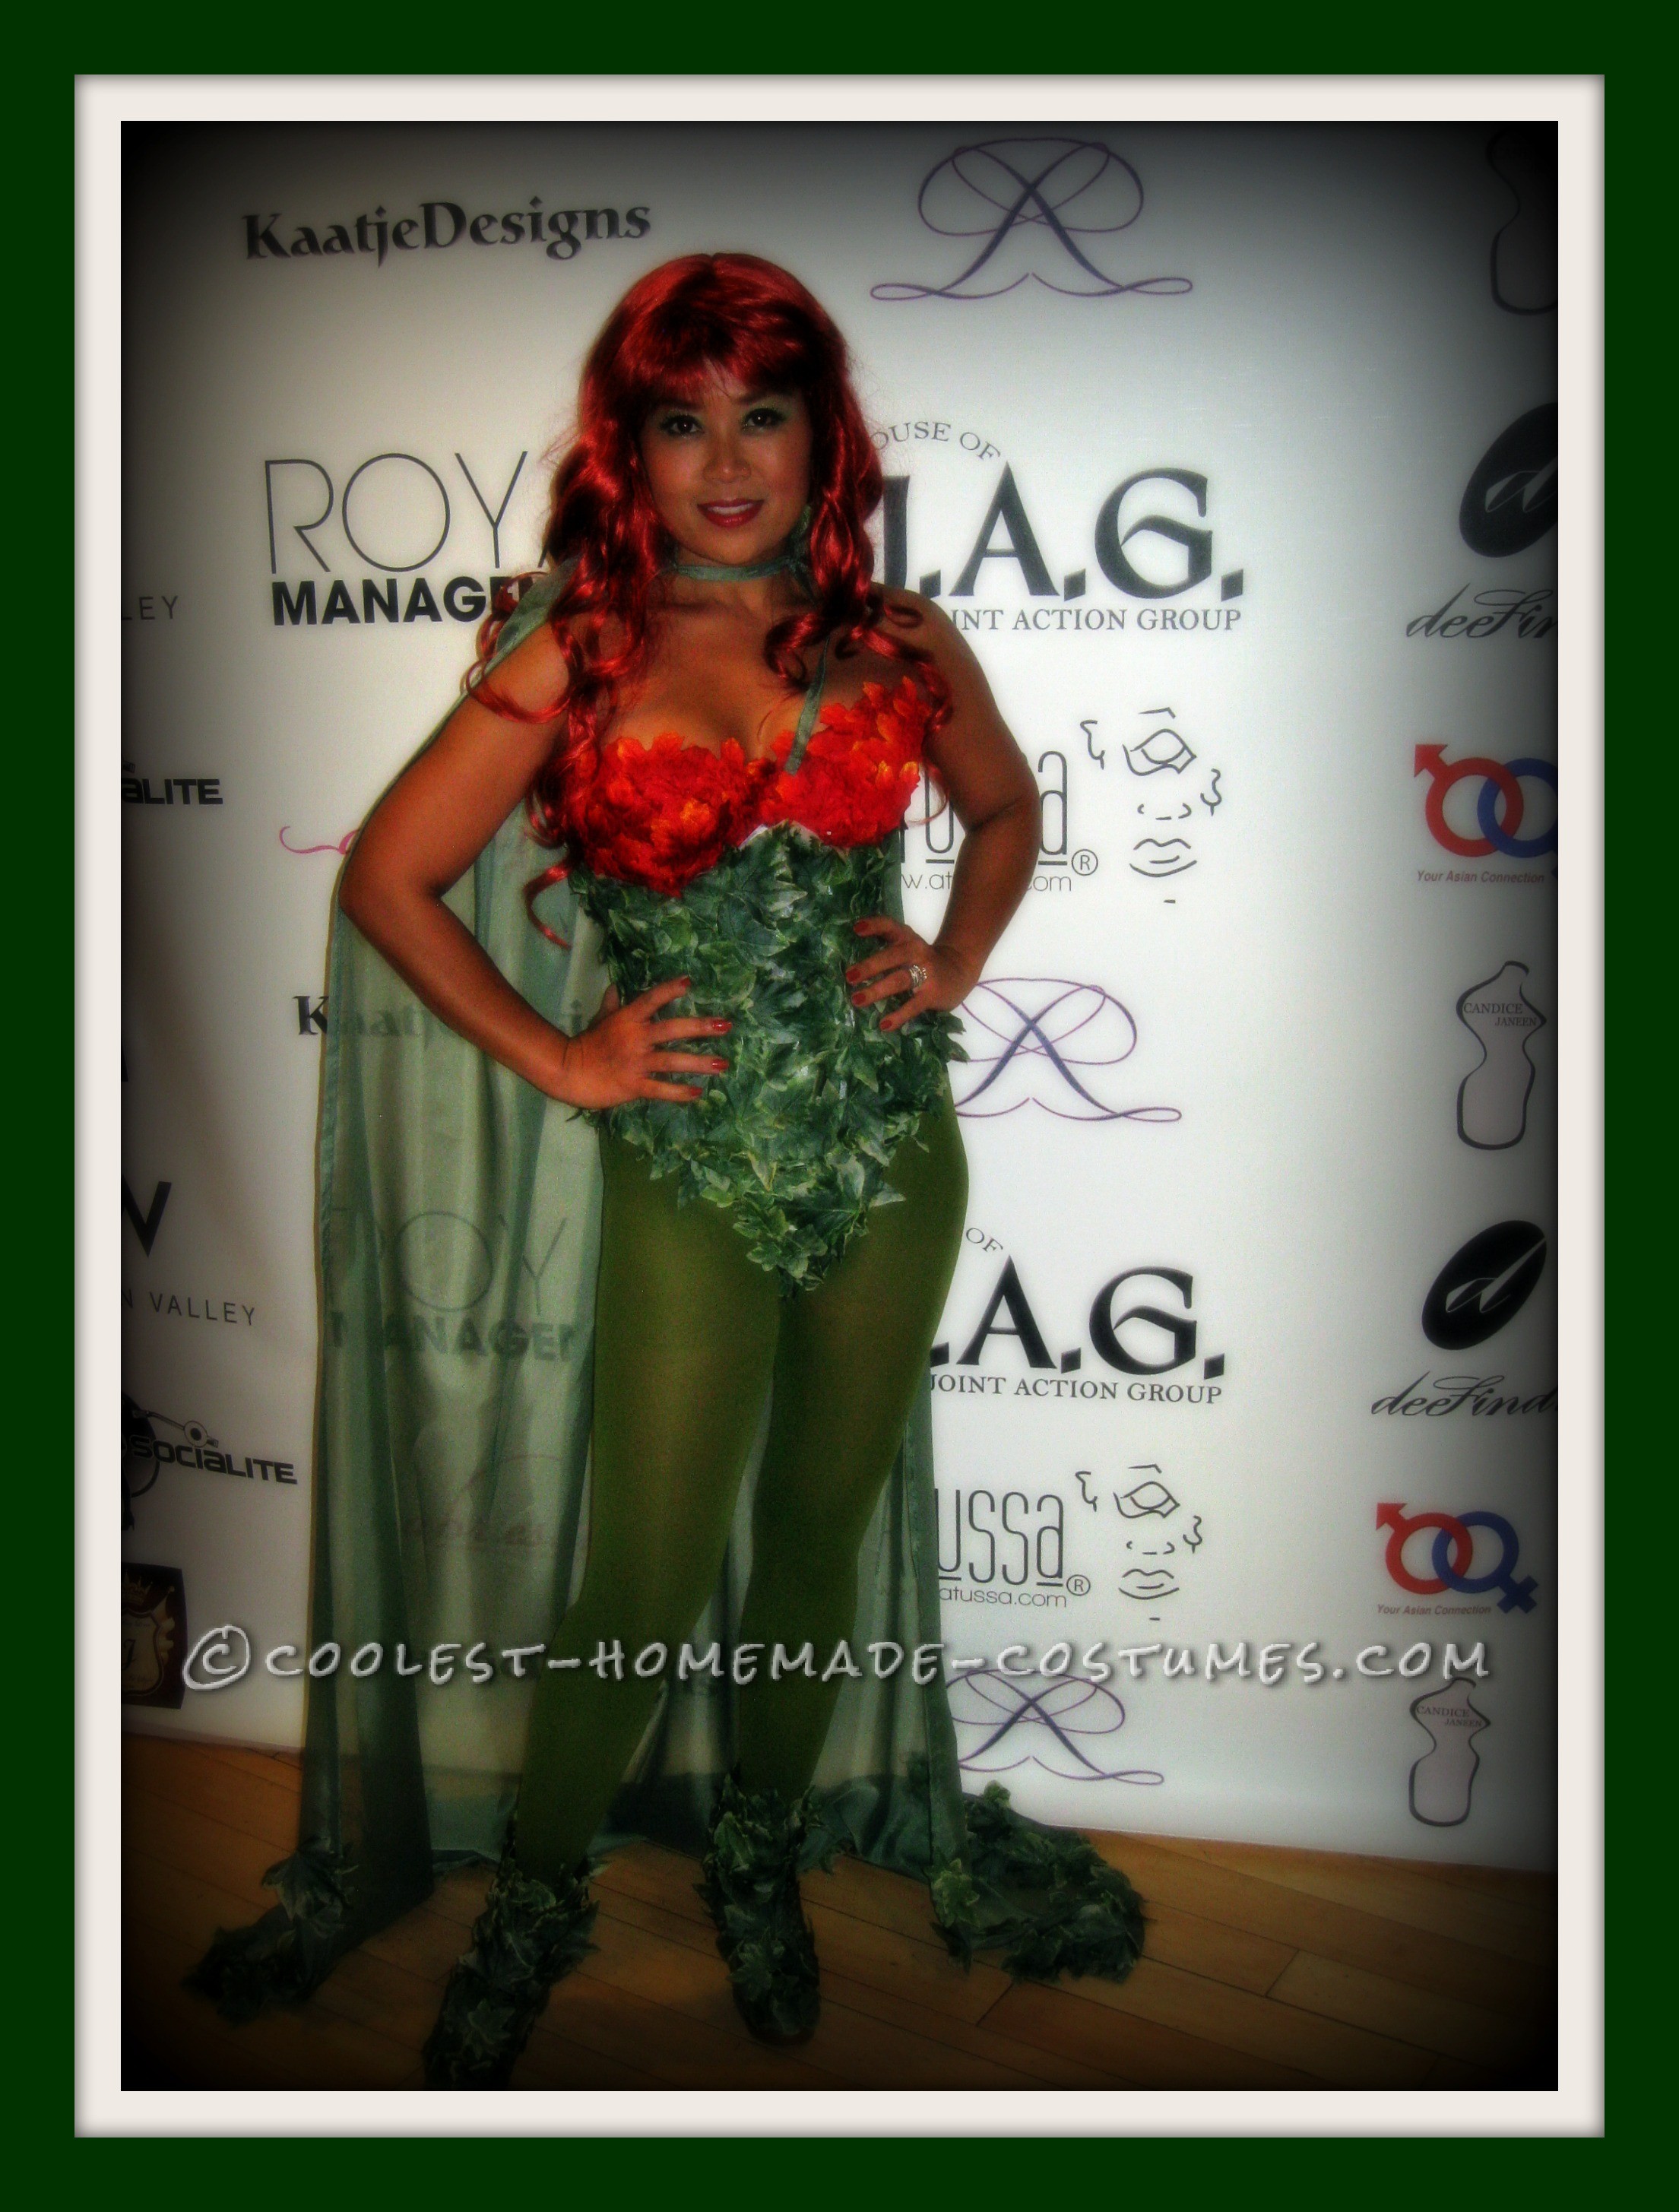 Coolest Homemade Poison Ivy Costume